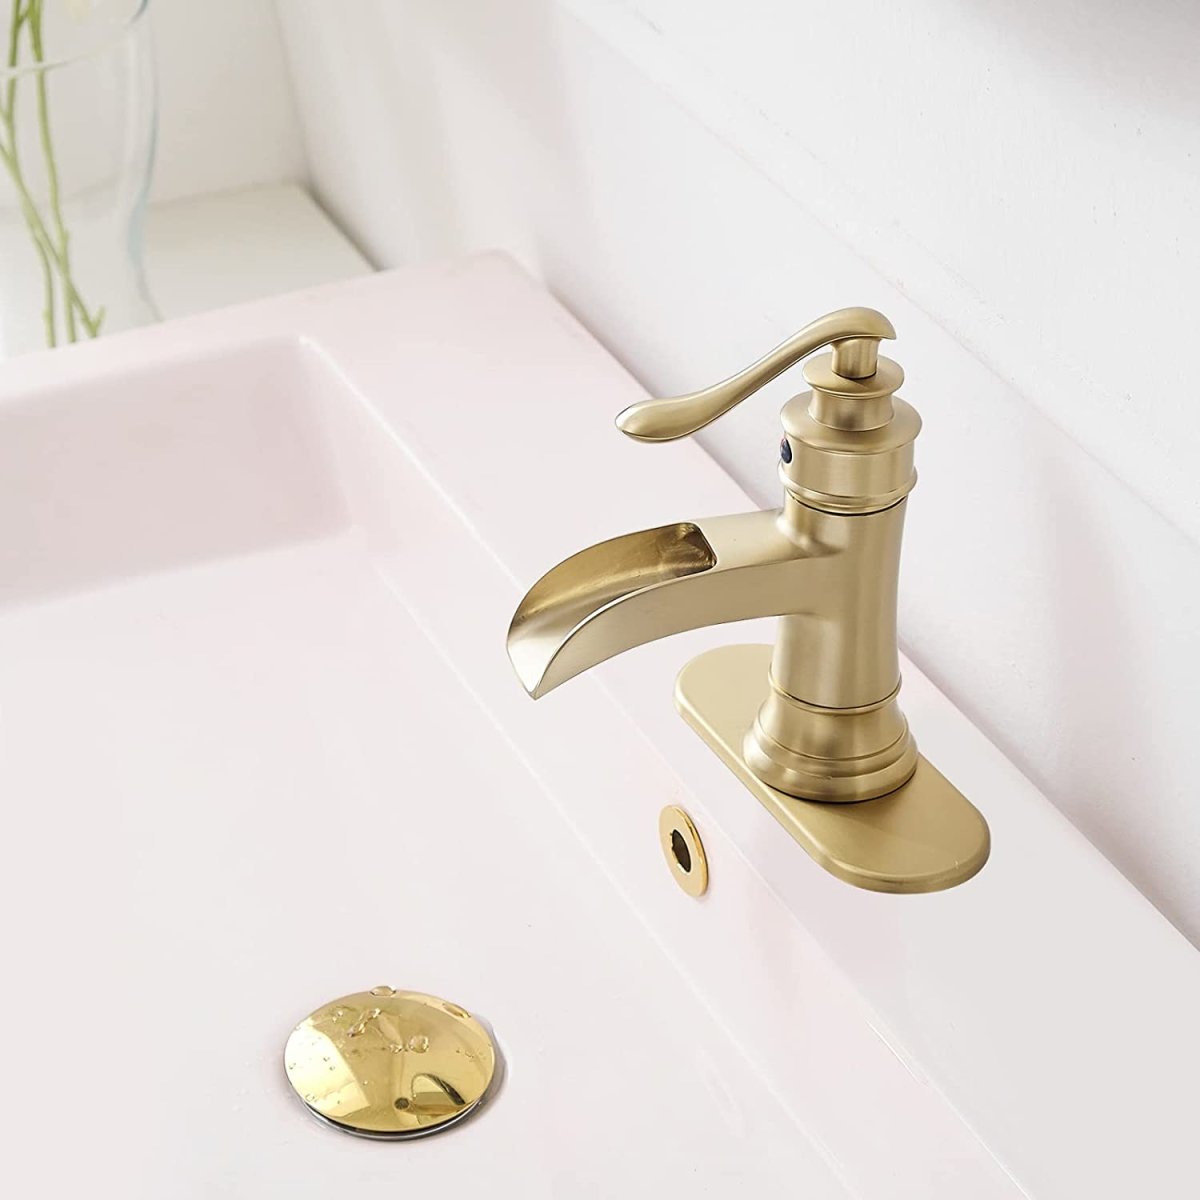 Waterfall Single-Handle Low-Arc Bathroom Faucet Brushed Gold-1 - buyfaucet.com